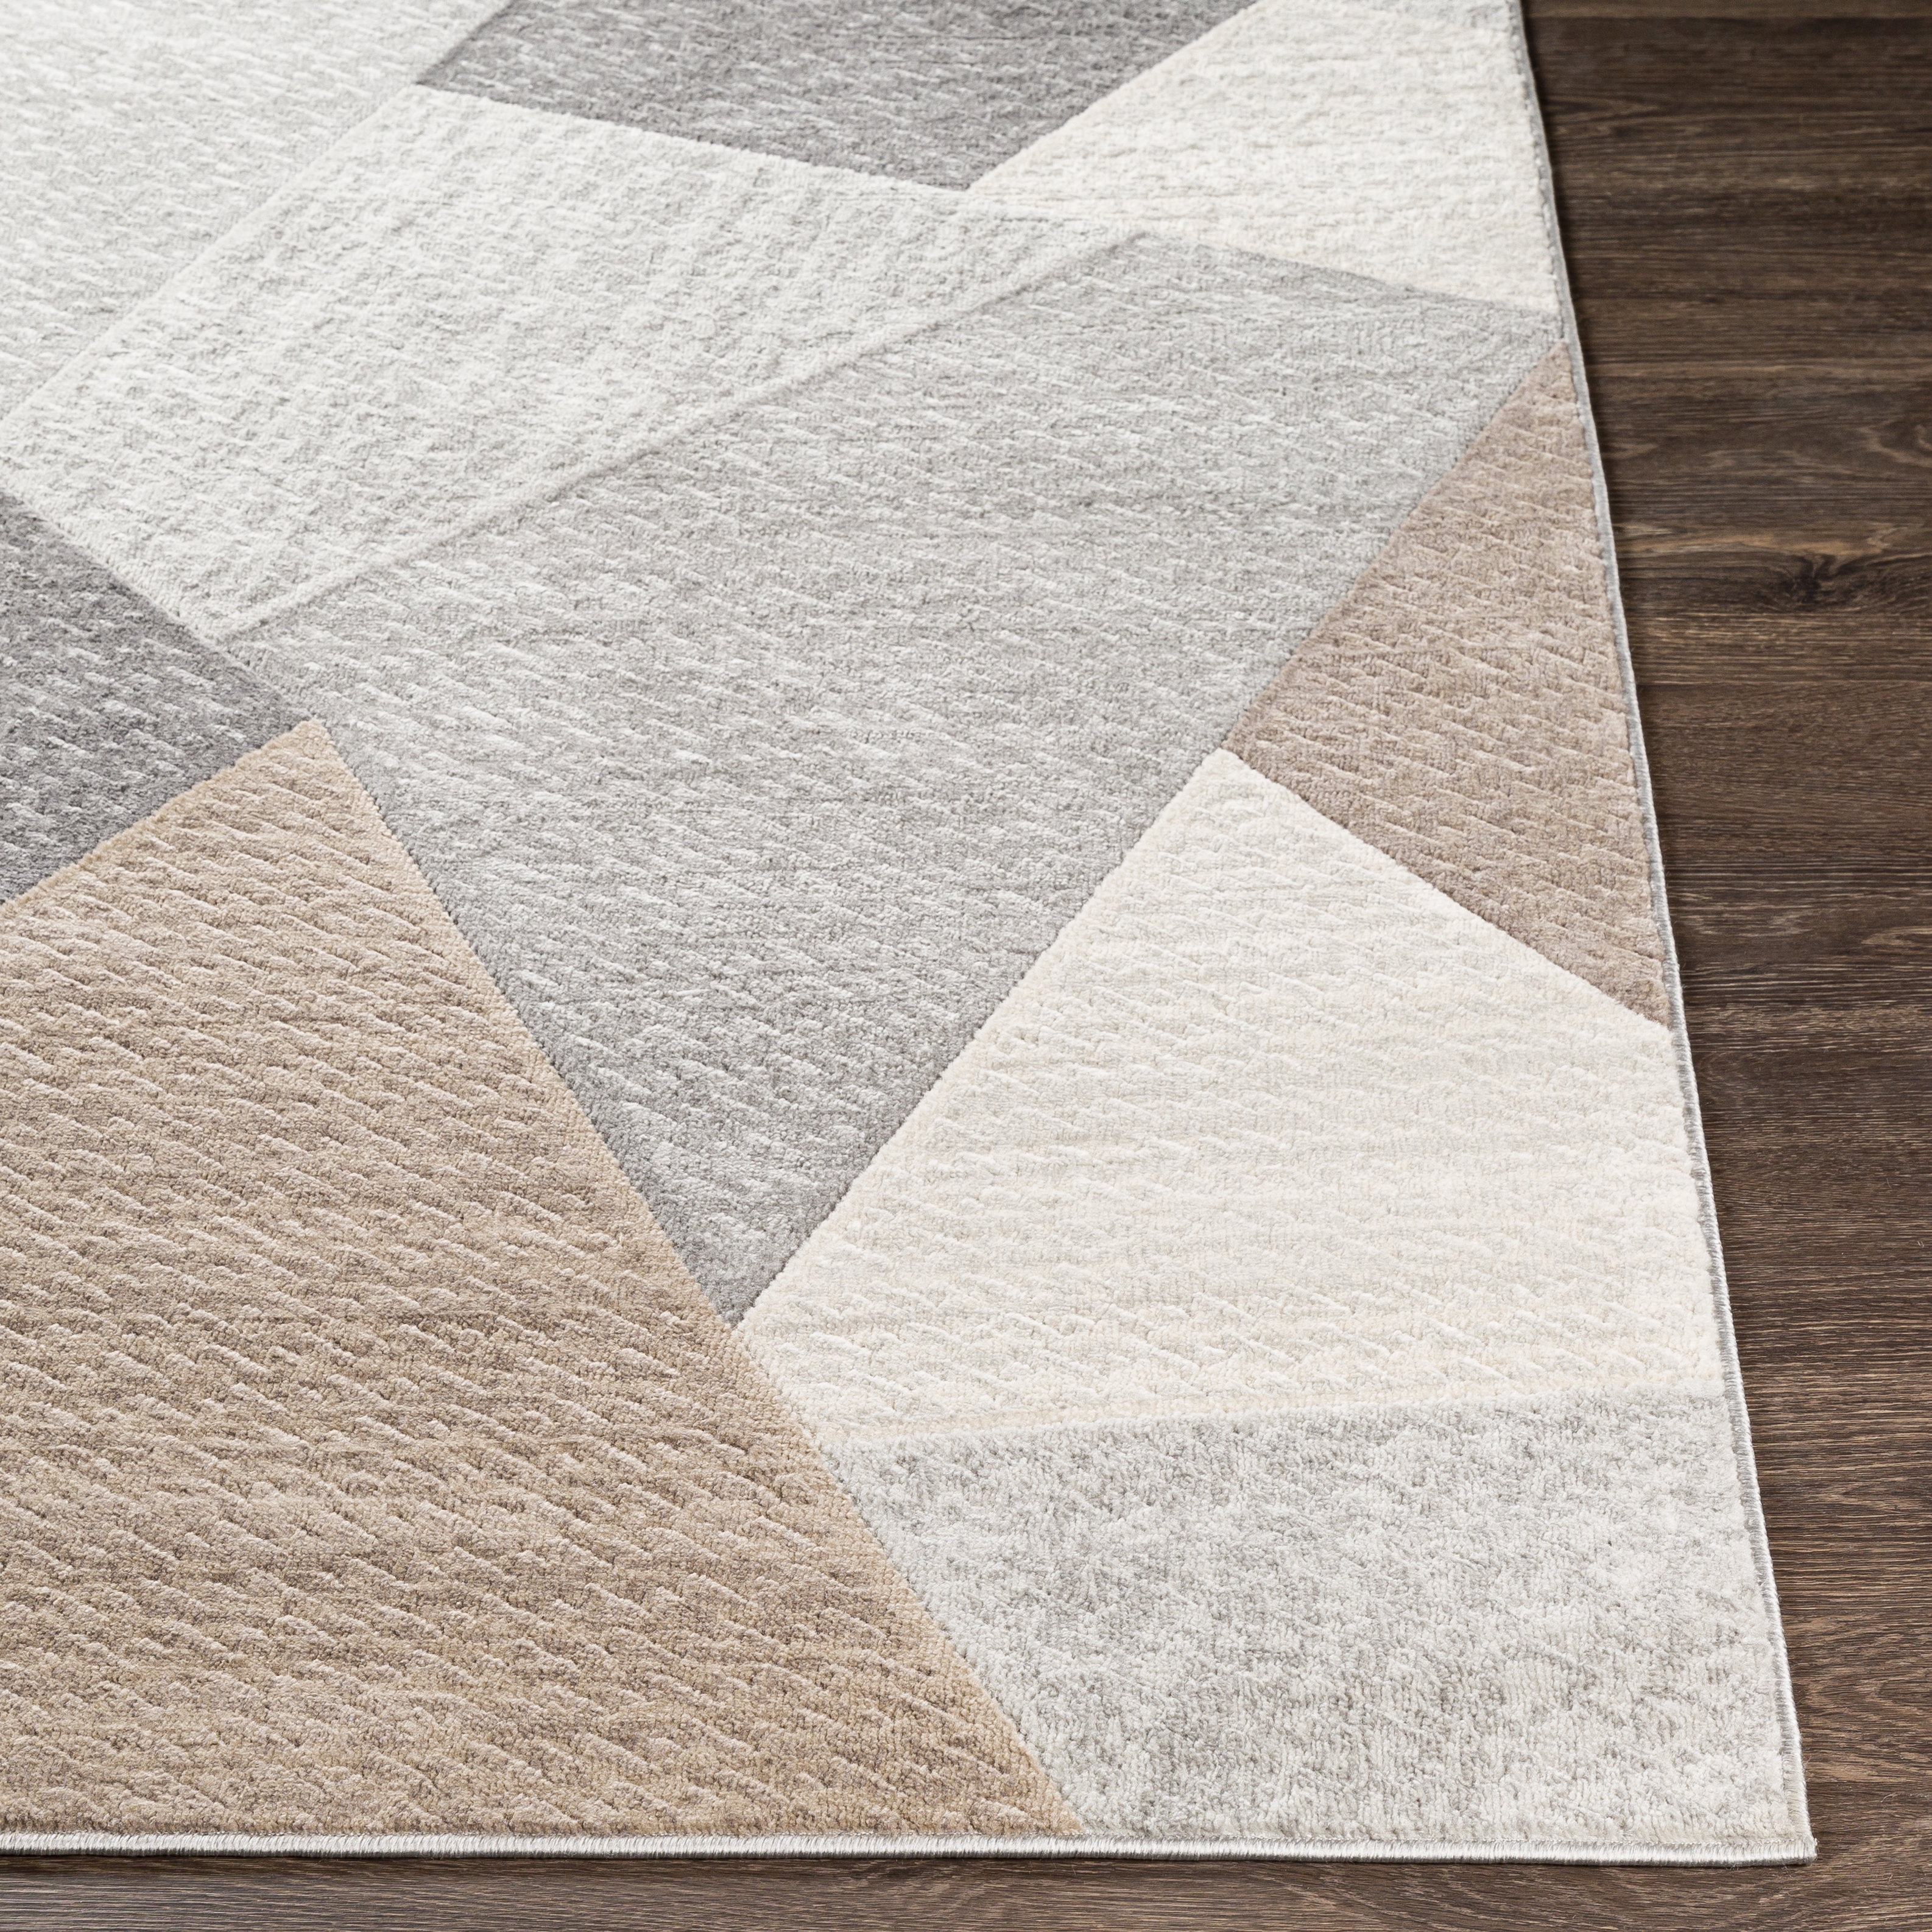 Remy Rug, 5'3" x 7'3" - Image 2